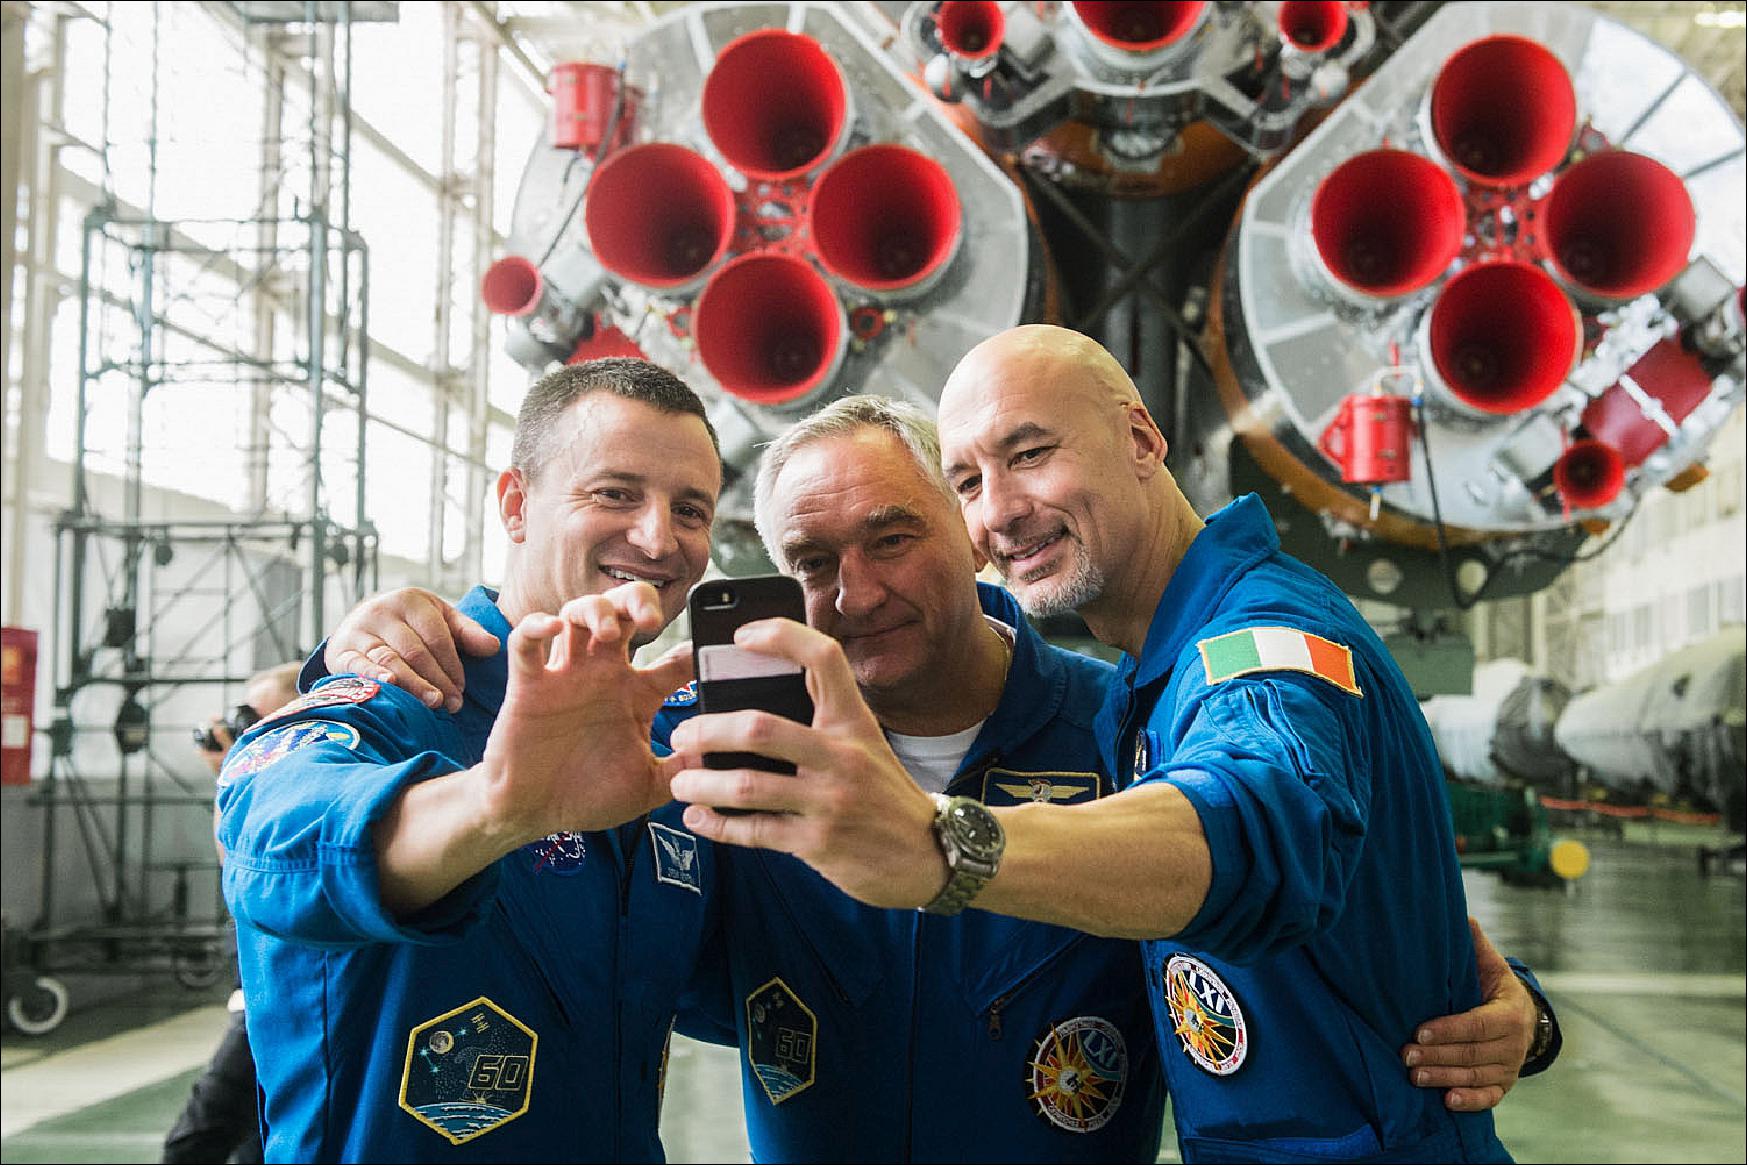 Figure 74: In the Integration Building at the Baikonur Cosmodrome in Kazakhstan, Expedition 60 crewmembers Drew Morgan of NASA (left), Alexander Skvortsov of Roscosmos (center) and Luca Parmitano of the European Space Agency (right) pose for a selfie in front of the first stage engines of their Soyuz booster on 16 July as part of pre-launch preparations (image credit: GCTC, A. Shelepin)